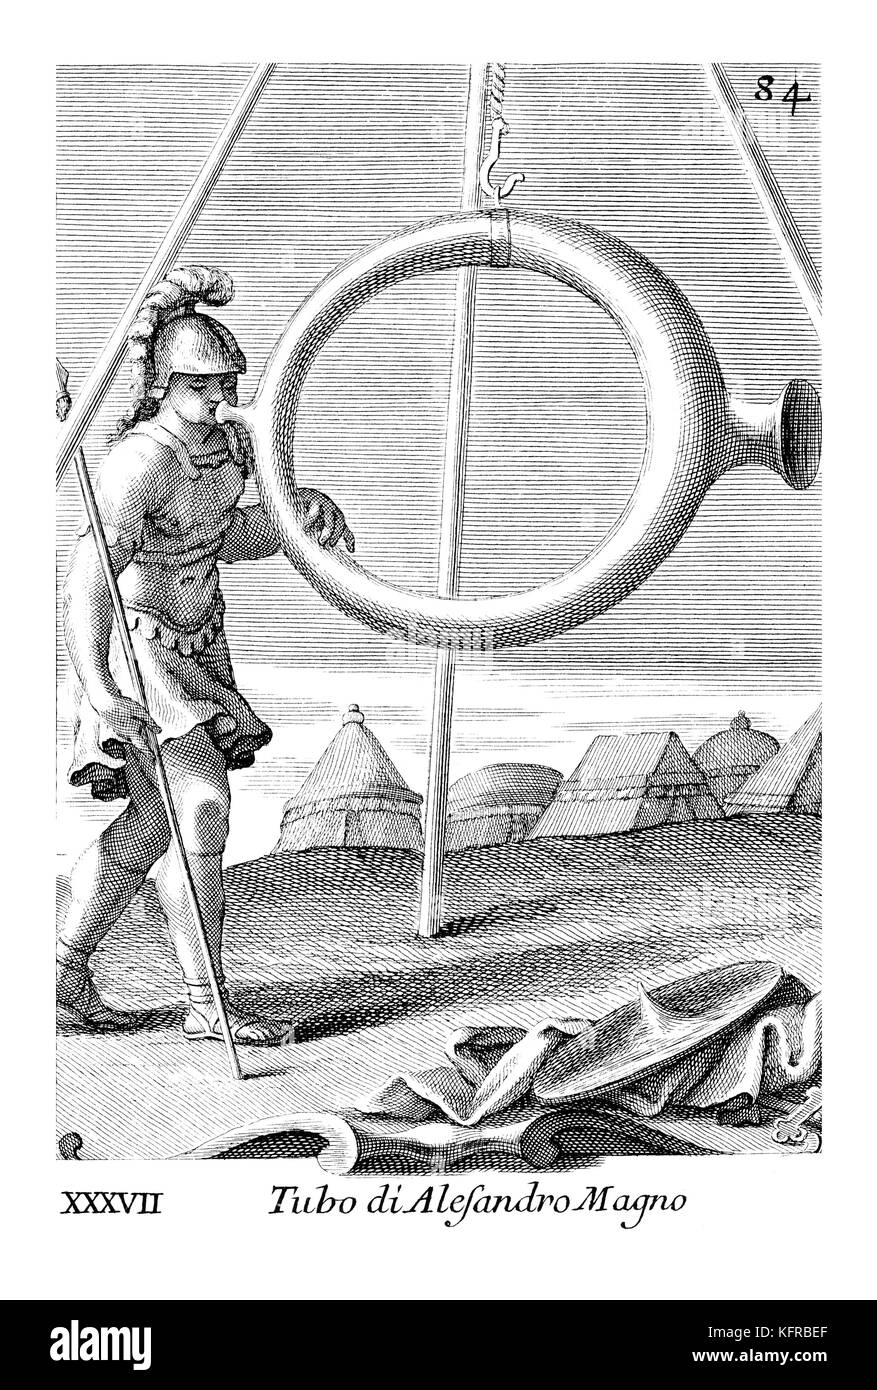 'Horn of Alexander the Great'. Illustration from Filippo Bonanni's  'Gabinetto Armonico'  published in 1723, Illustration 37. Engraving by Arnold van Westerhout.Caption reads Tubo di Alesandro Magno. Stock Photo